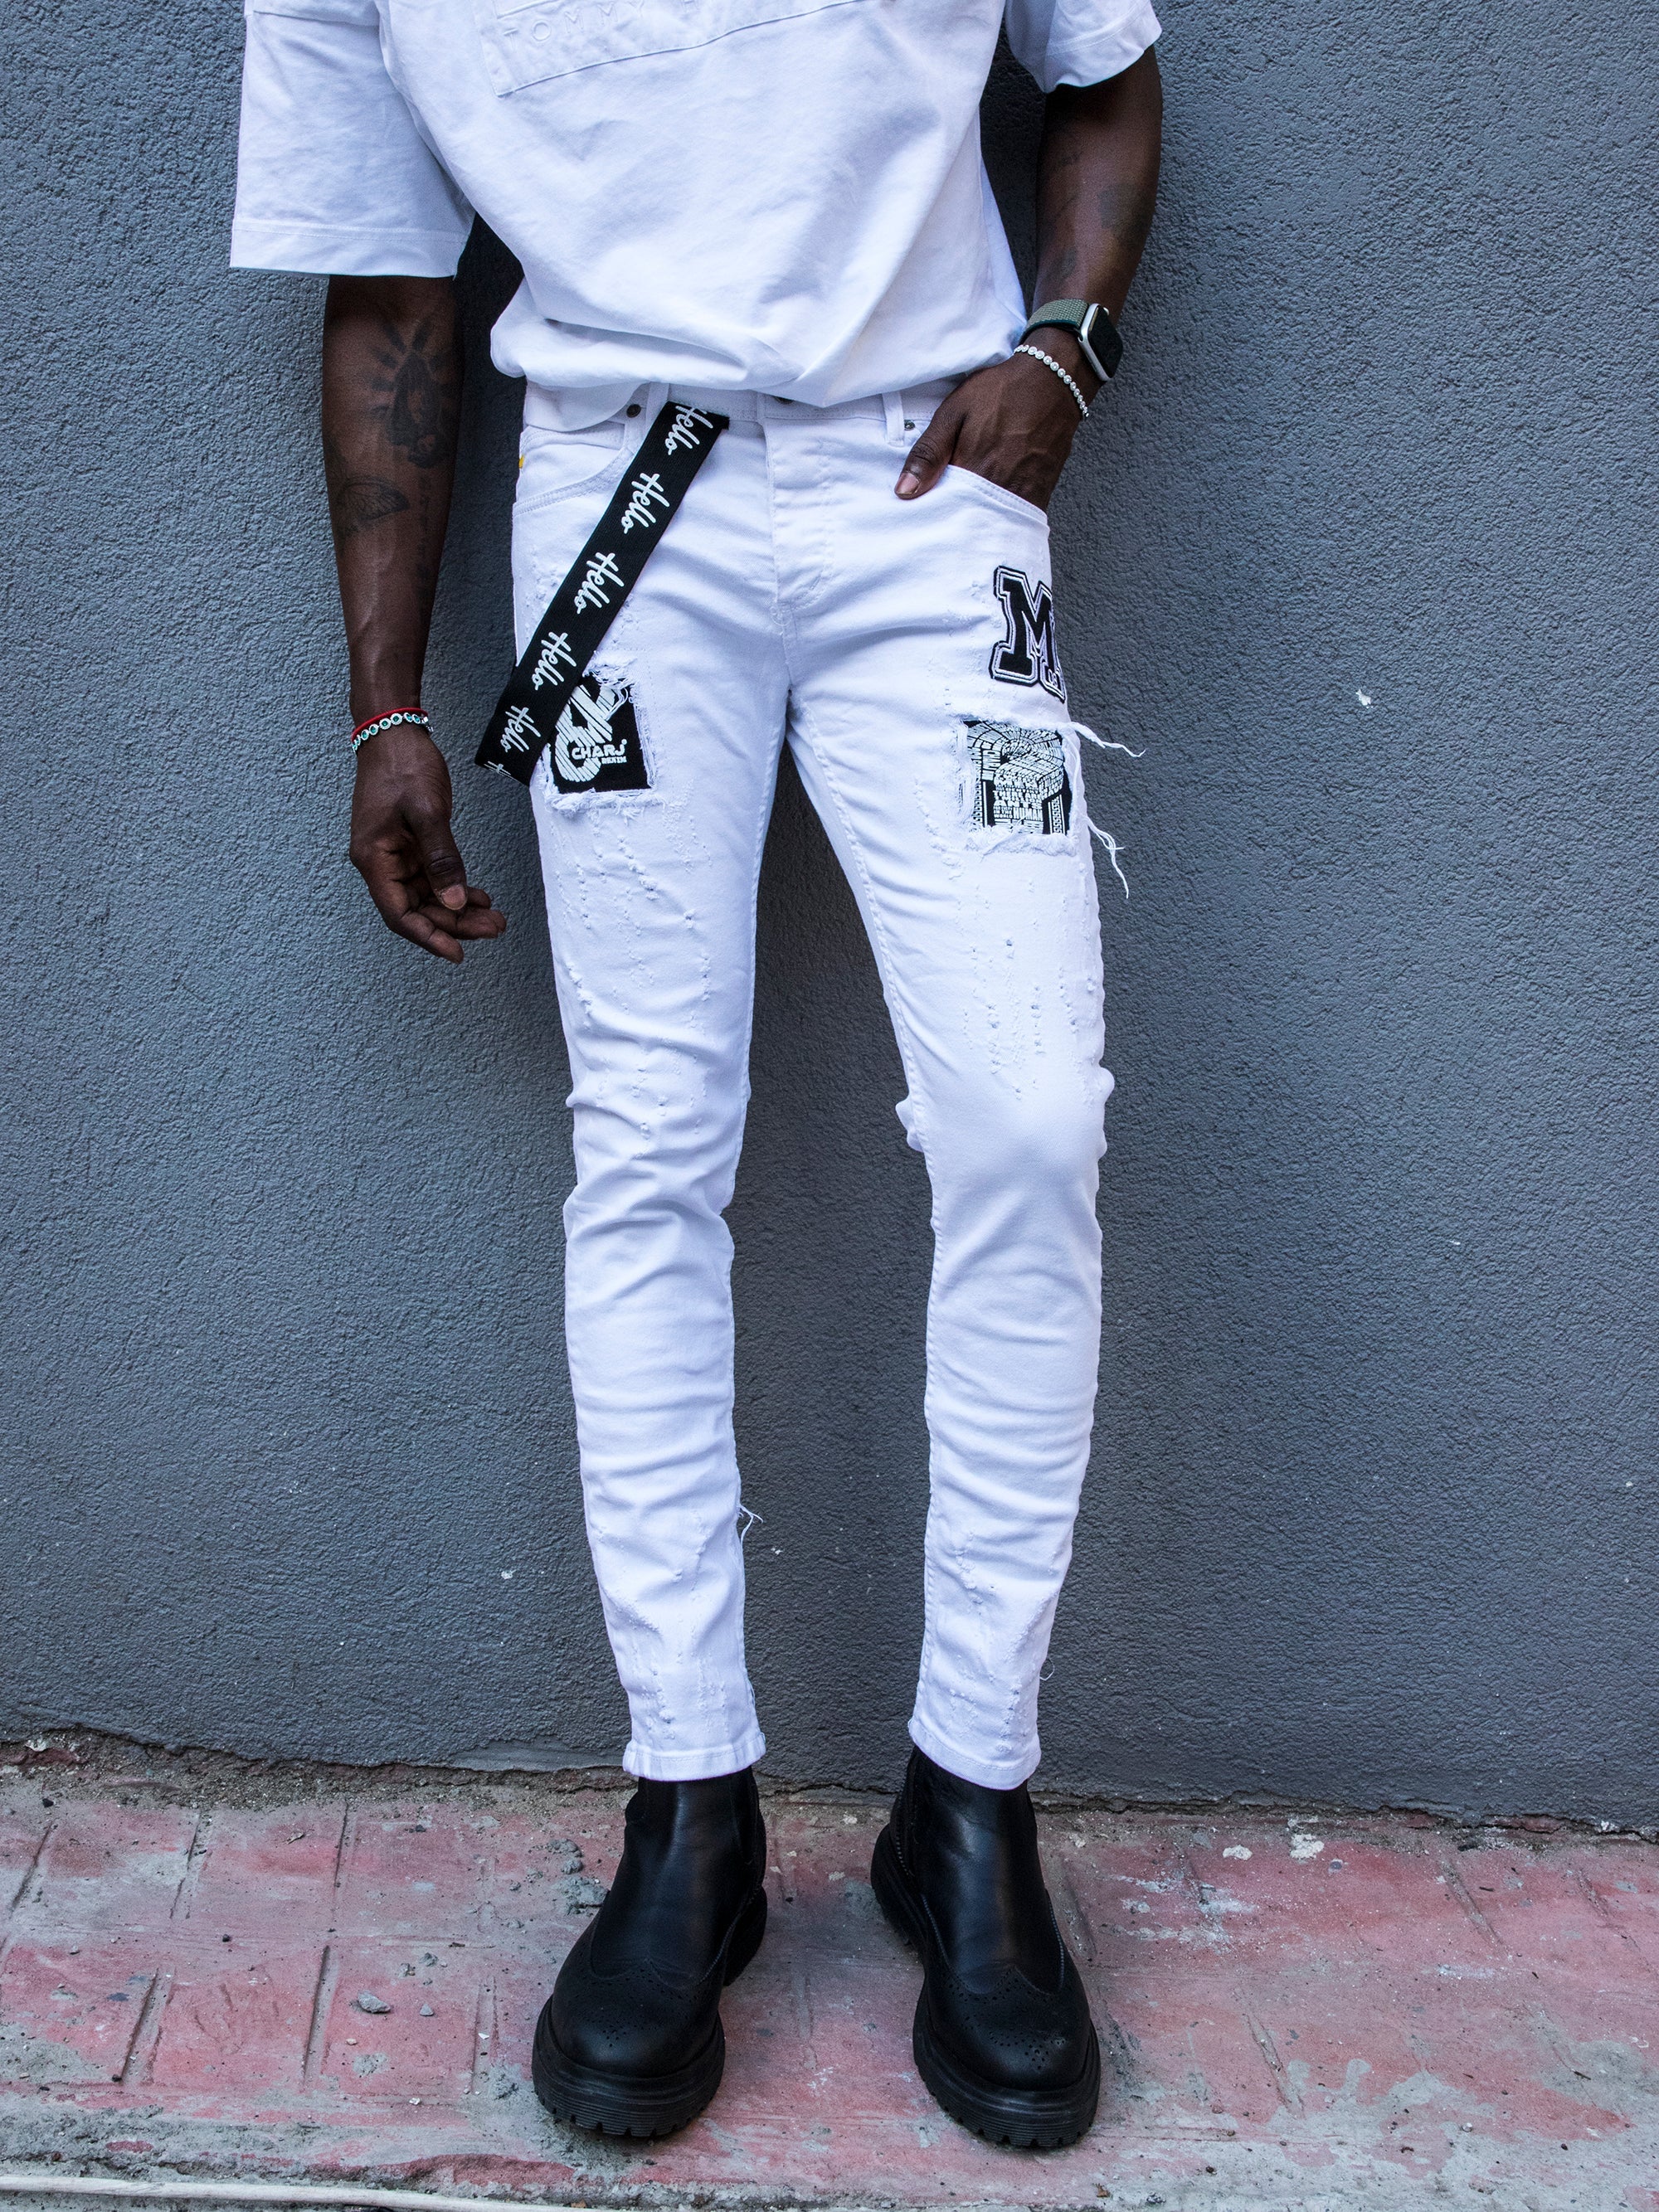 A man wearing white jeans and a black t - shirt MASSIVE.